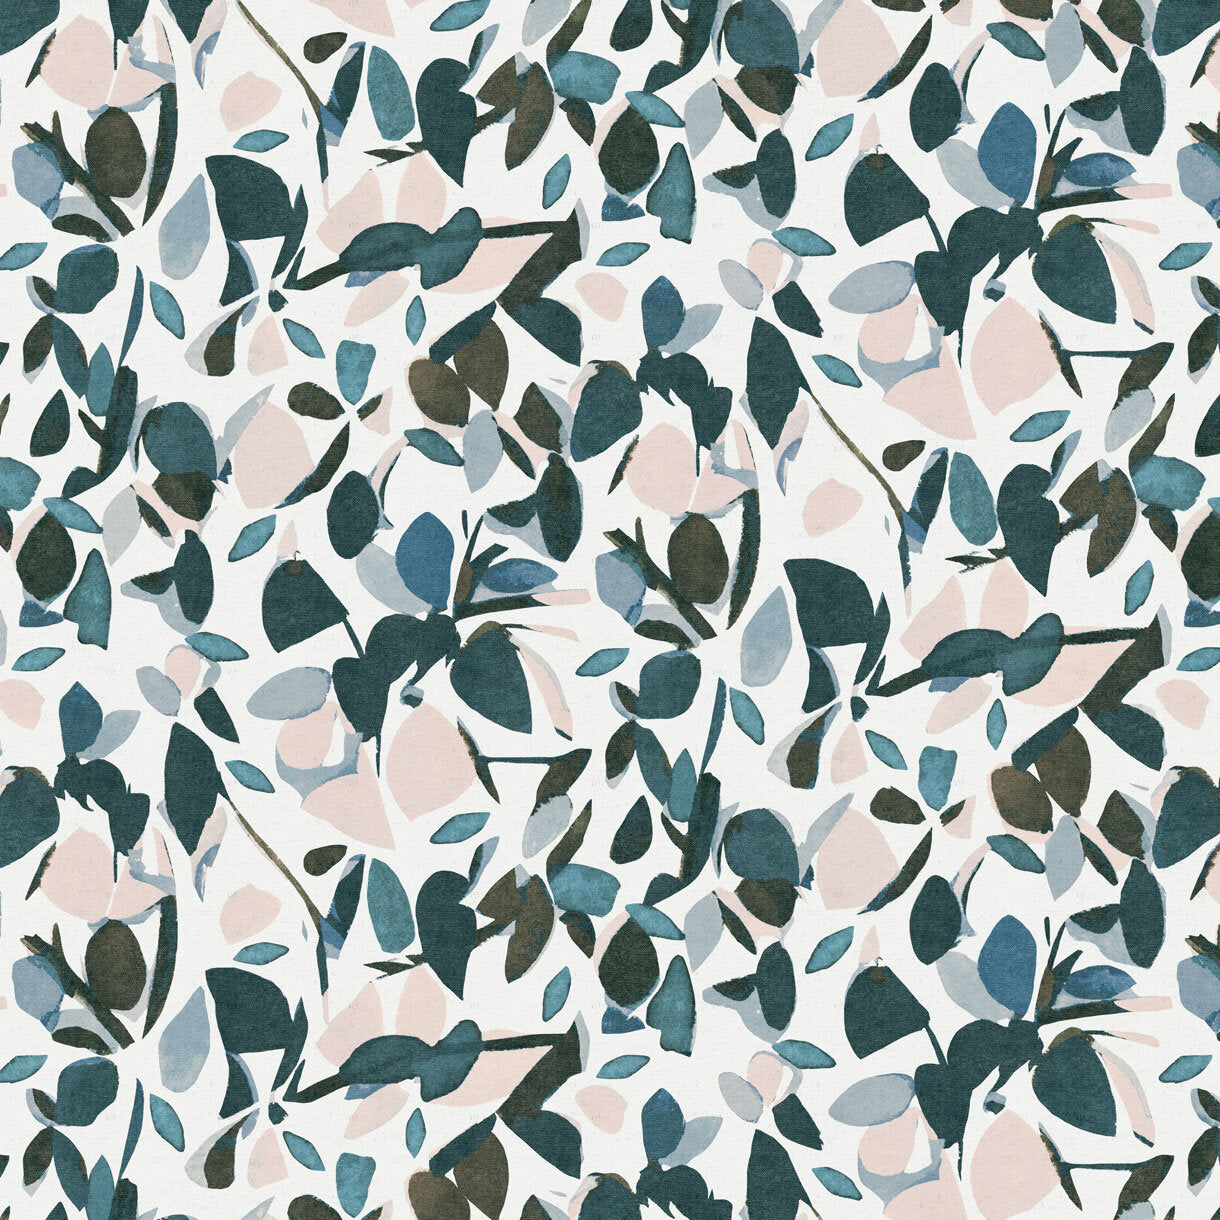 Detail of fabric in a minimal leaf print in shades of blue, brown and pink on a white field.